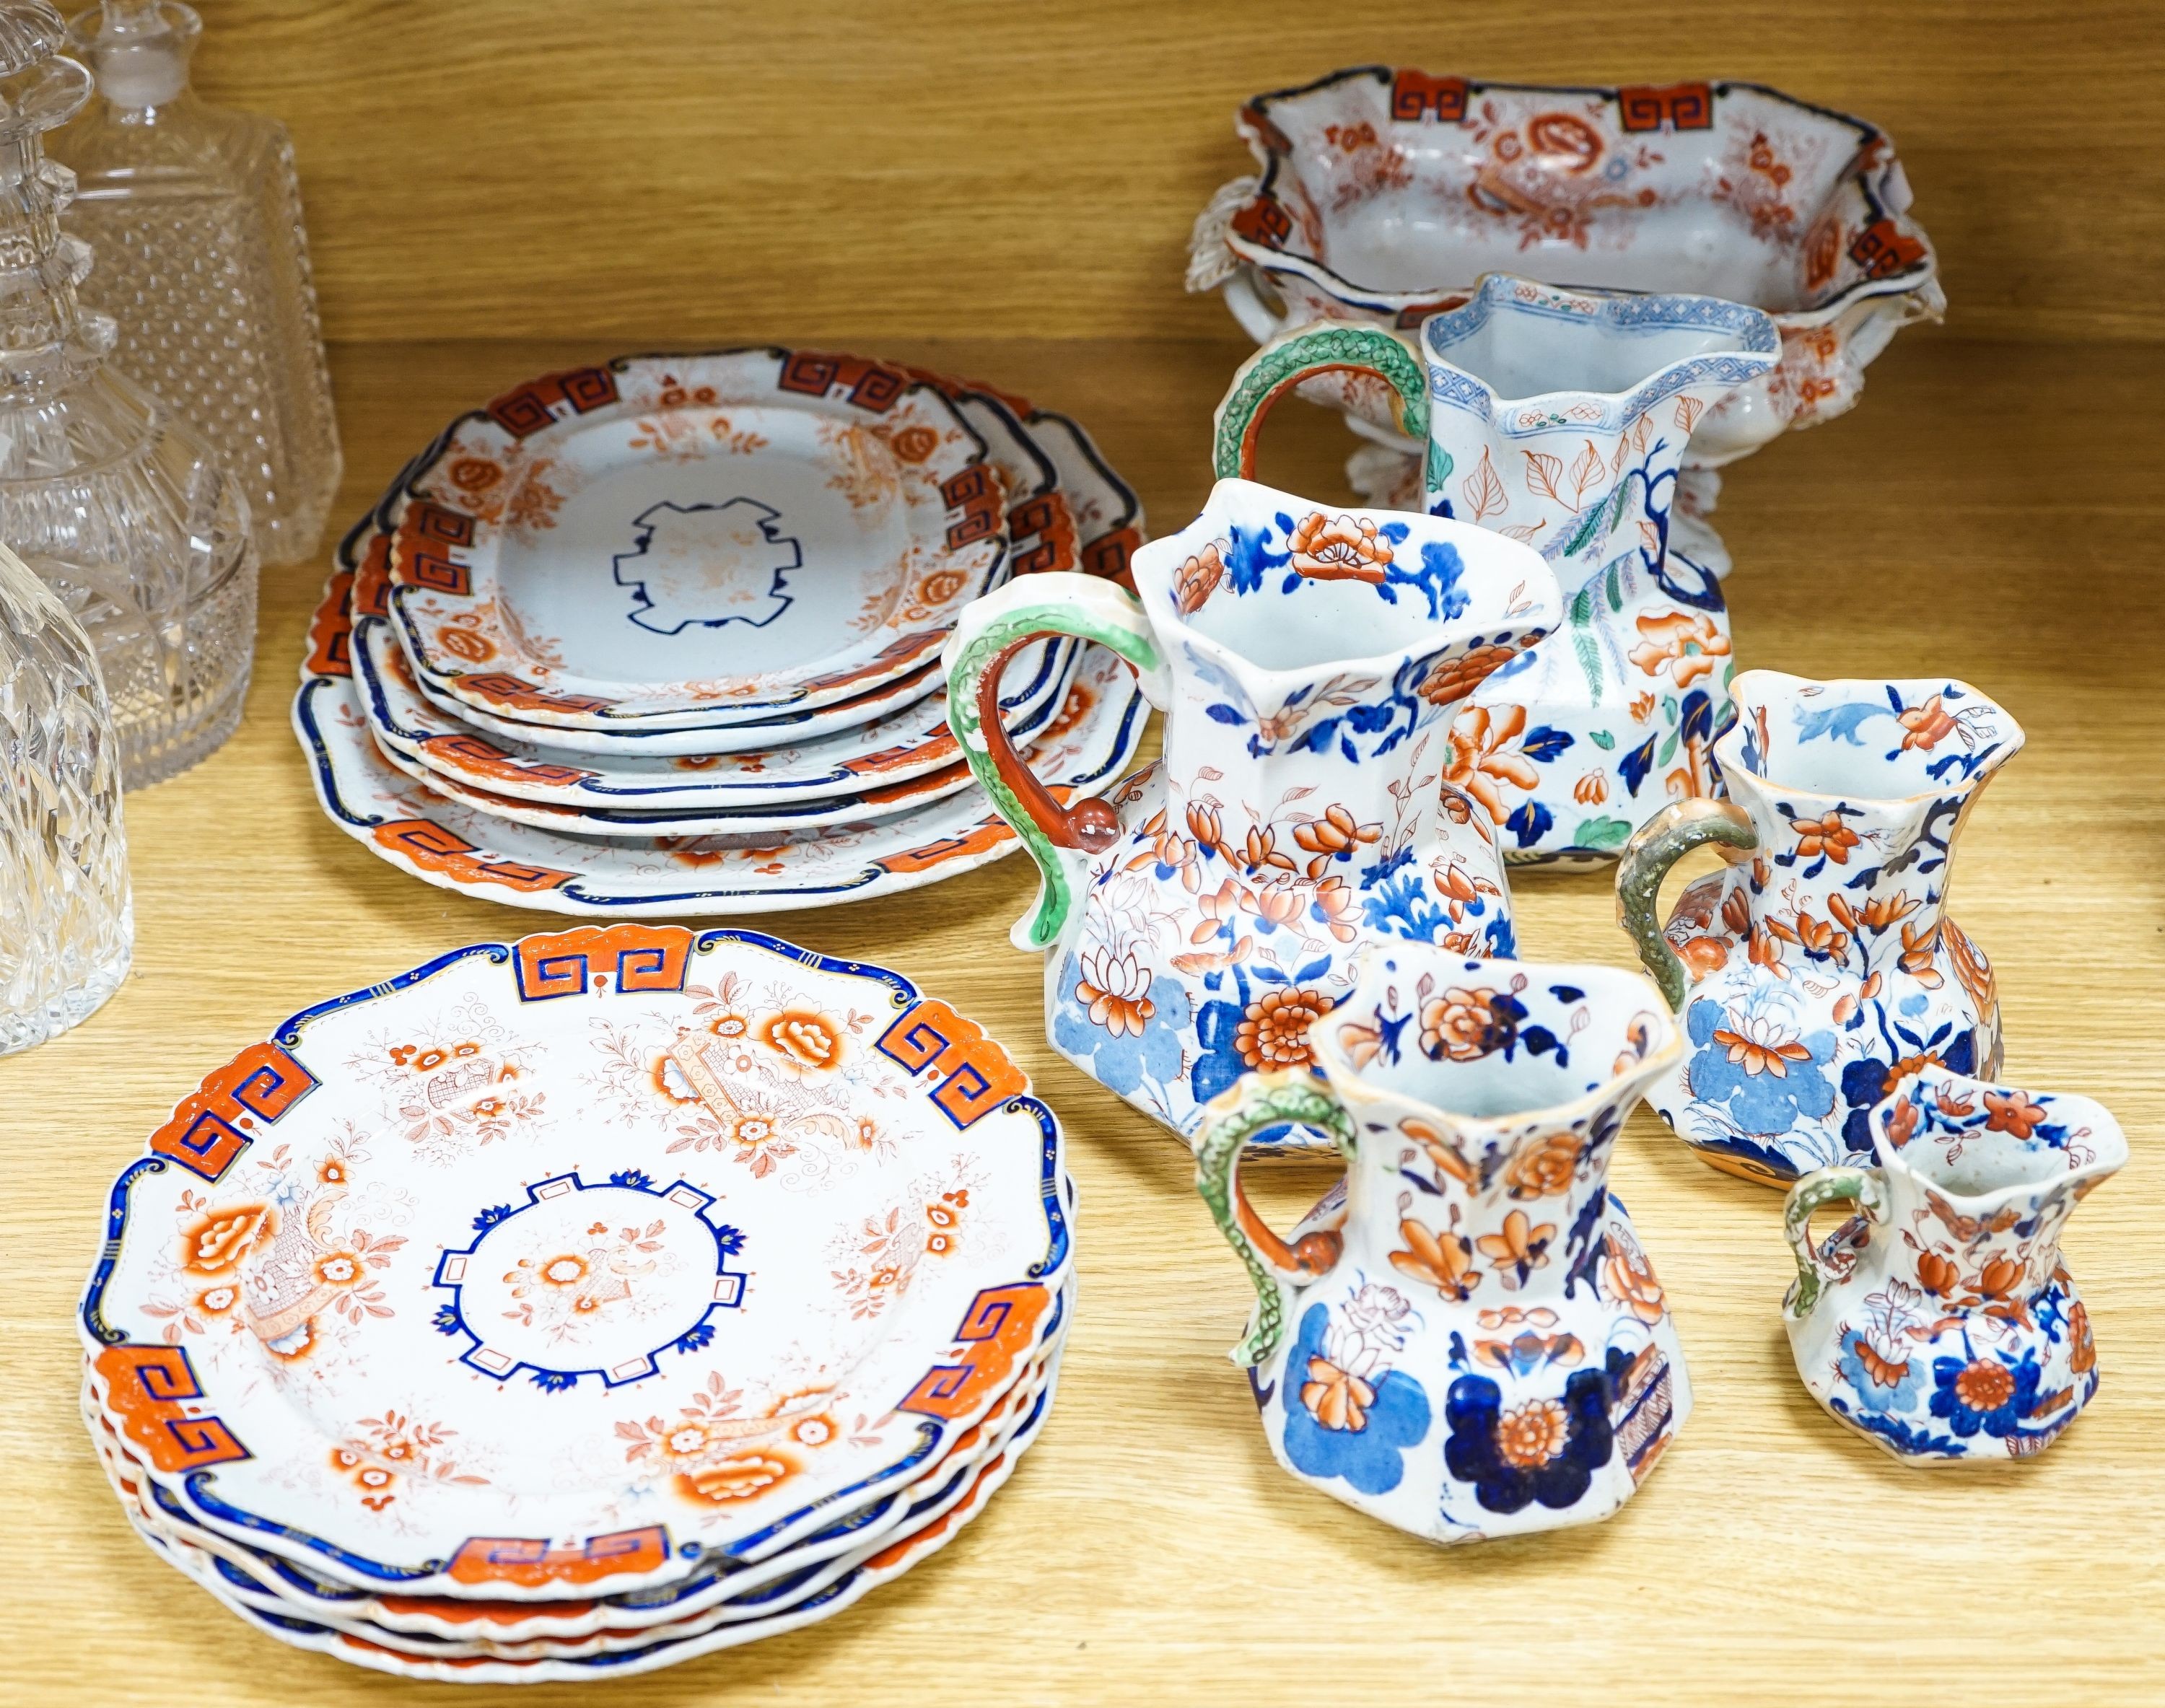 Five Masons ironstone jugs and a Masons ironstone part dinner service, to include a tureen and an oval dish